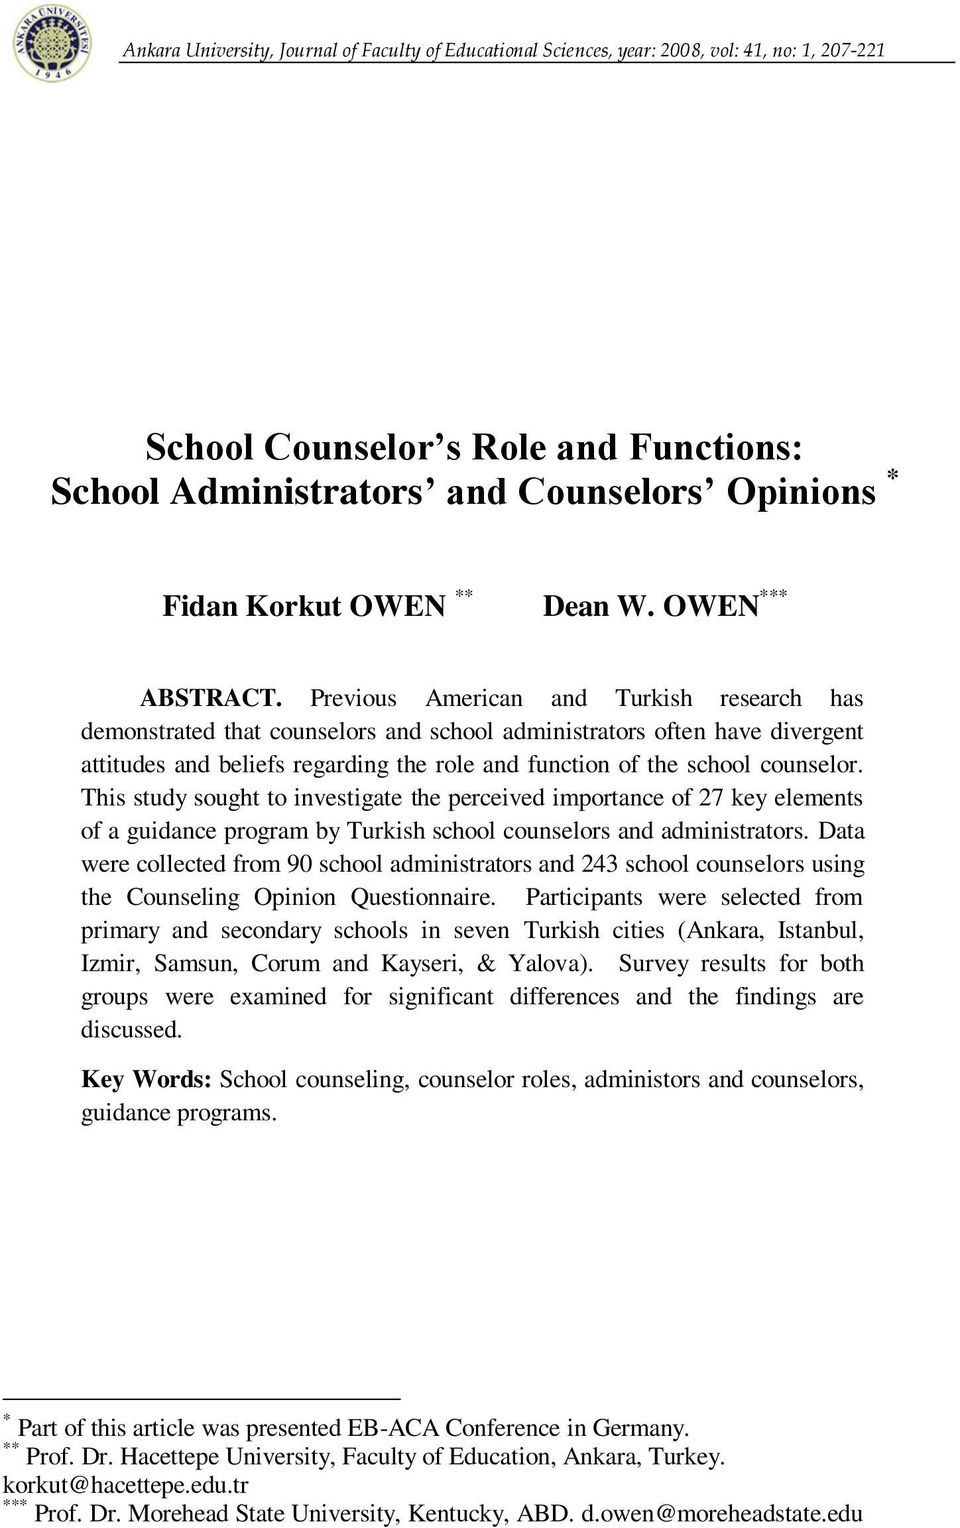 Previous American and Turkish research has demonstrated that counselors and school administrators often have divergent attitudes and beliefs regarding the role and function of the school counselor.